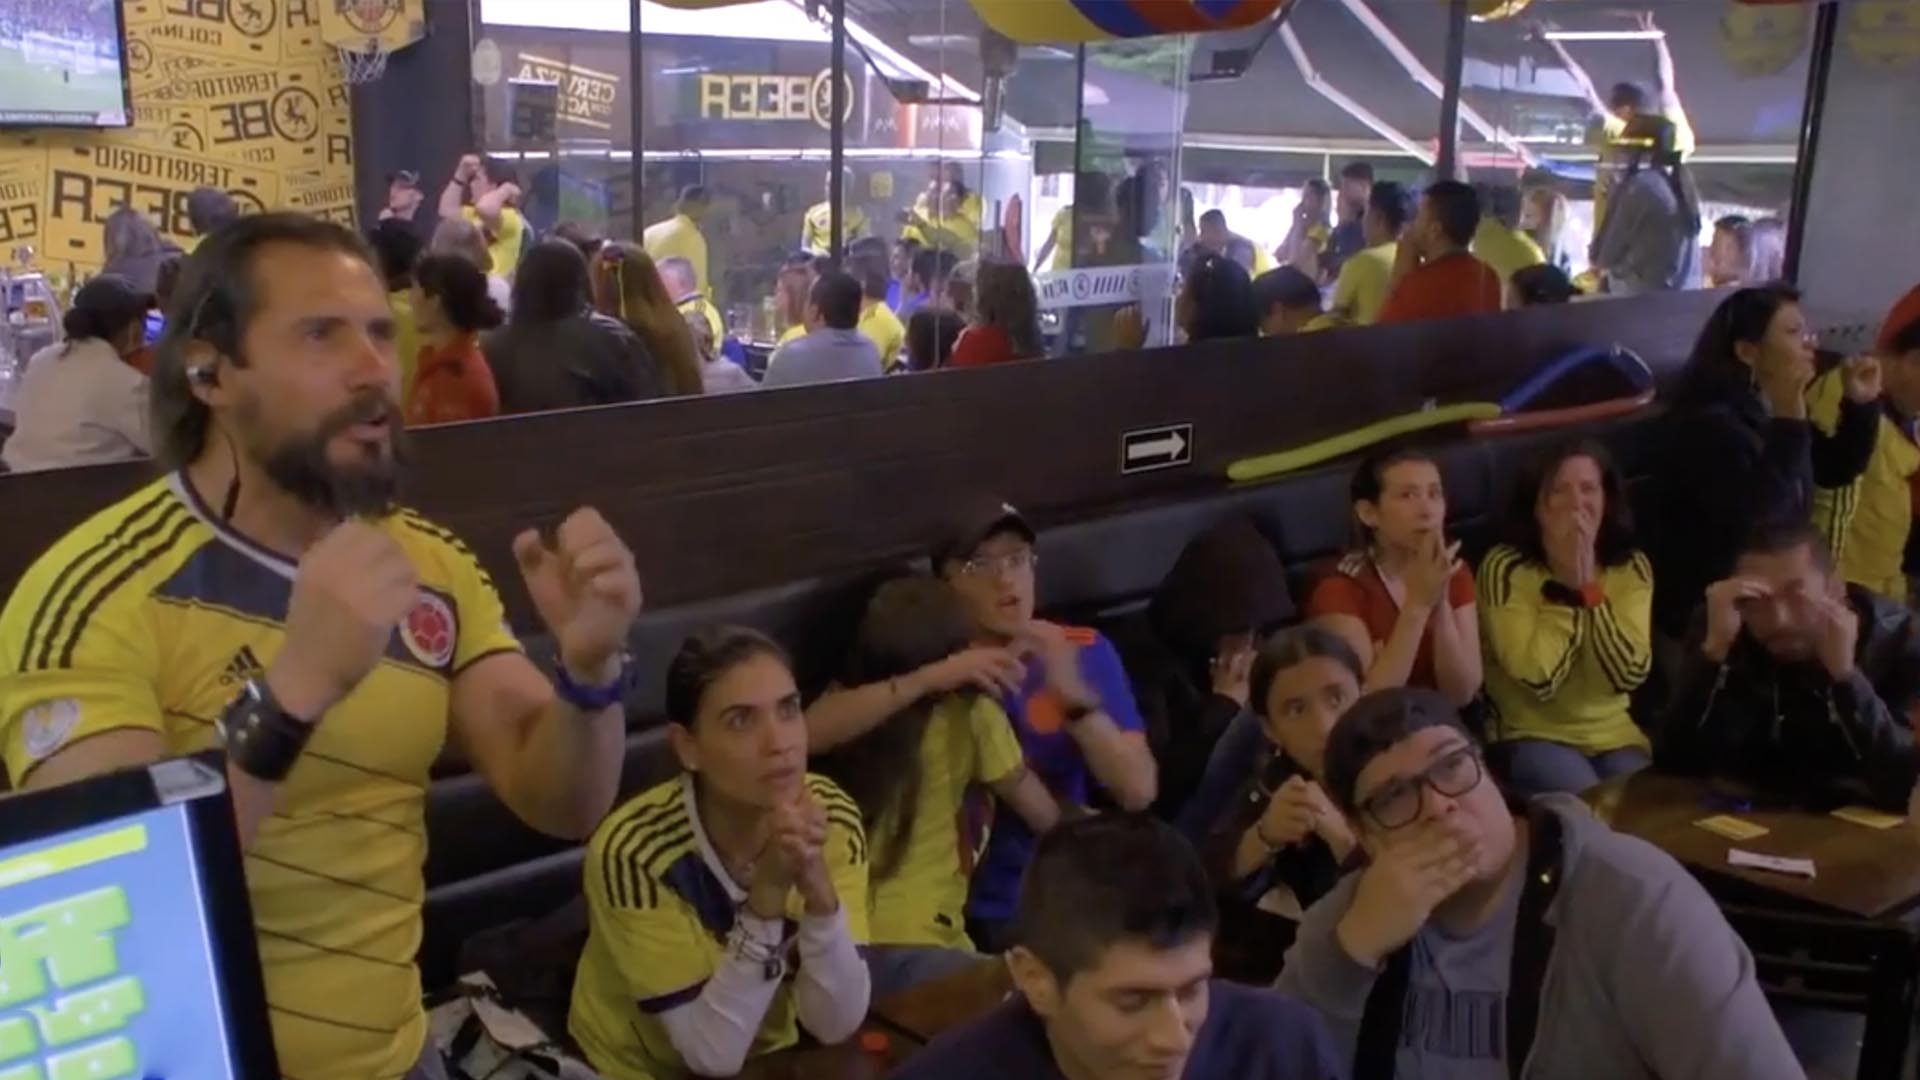 Soccer fans in Colombia drive up beer sales during the World Cup